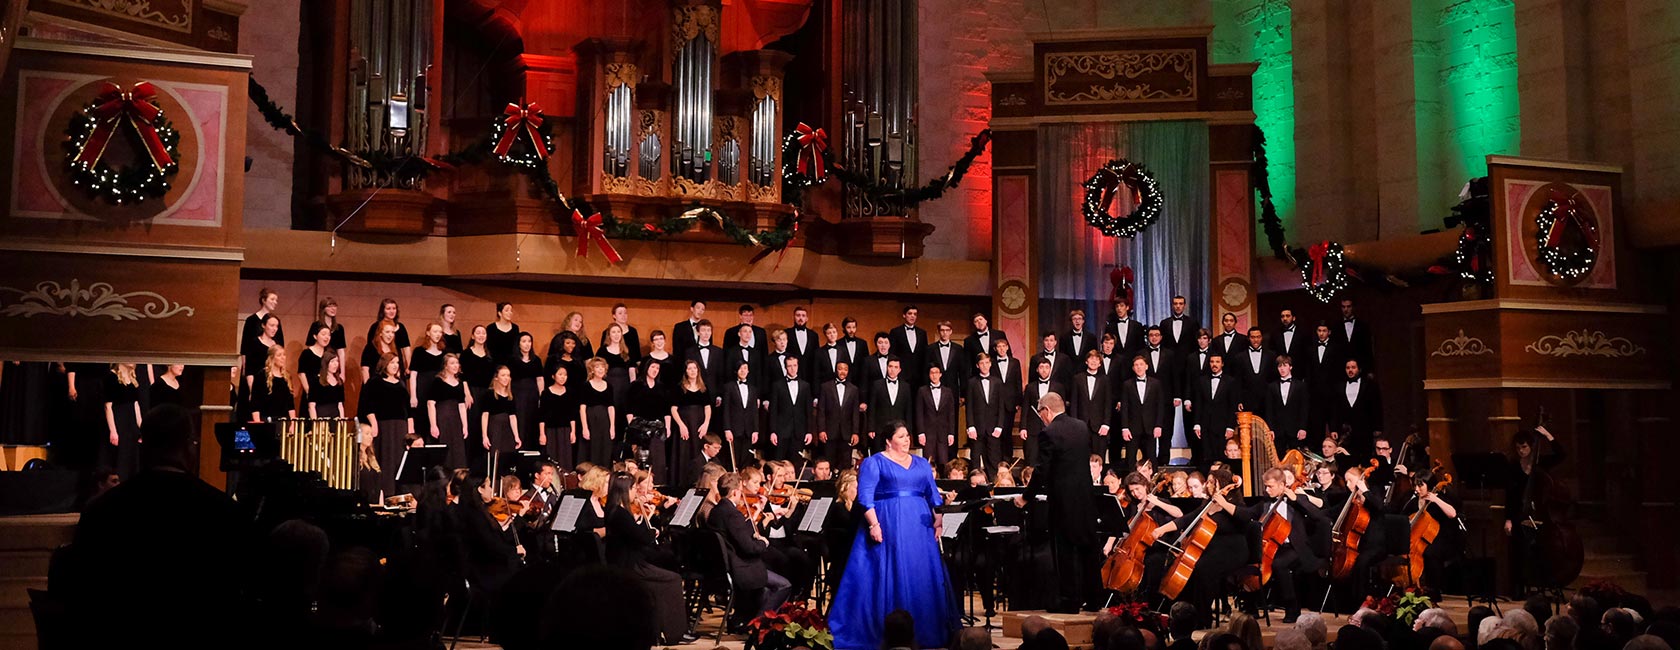 Award-winning Opera soprano Angela Meade ’01 (center in blue) at PLU’s 125th Anniversary Gala Concert on Friday, Dec. 11 in Lagerquist Concert Hall. (Photo by PLU/John Froschauer)